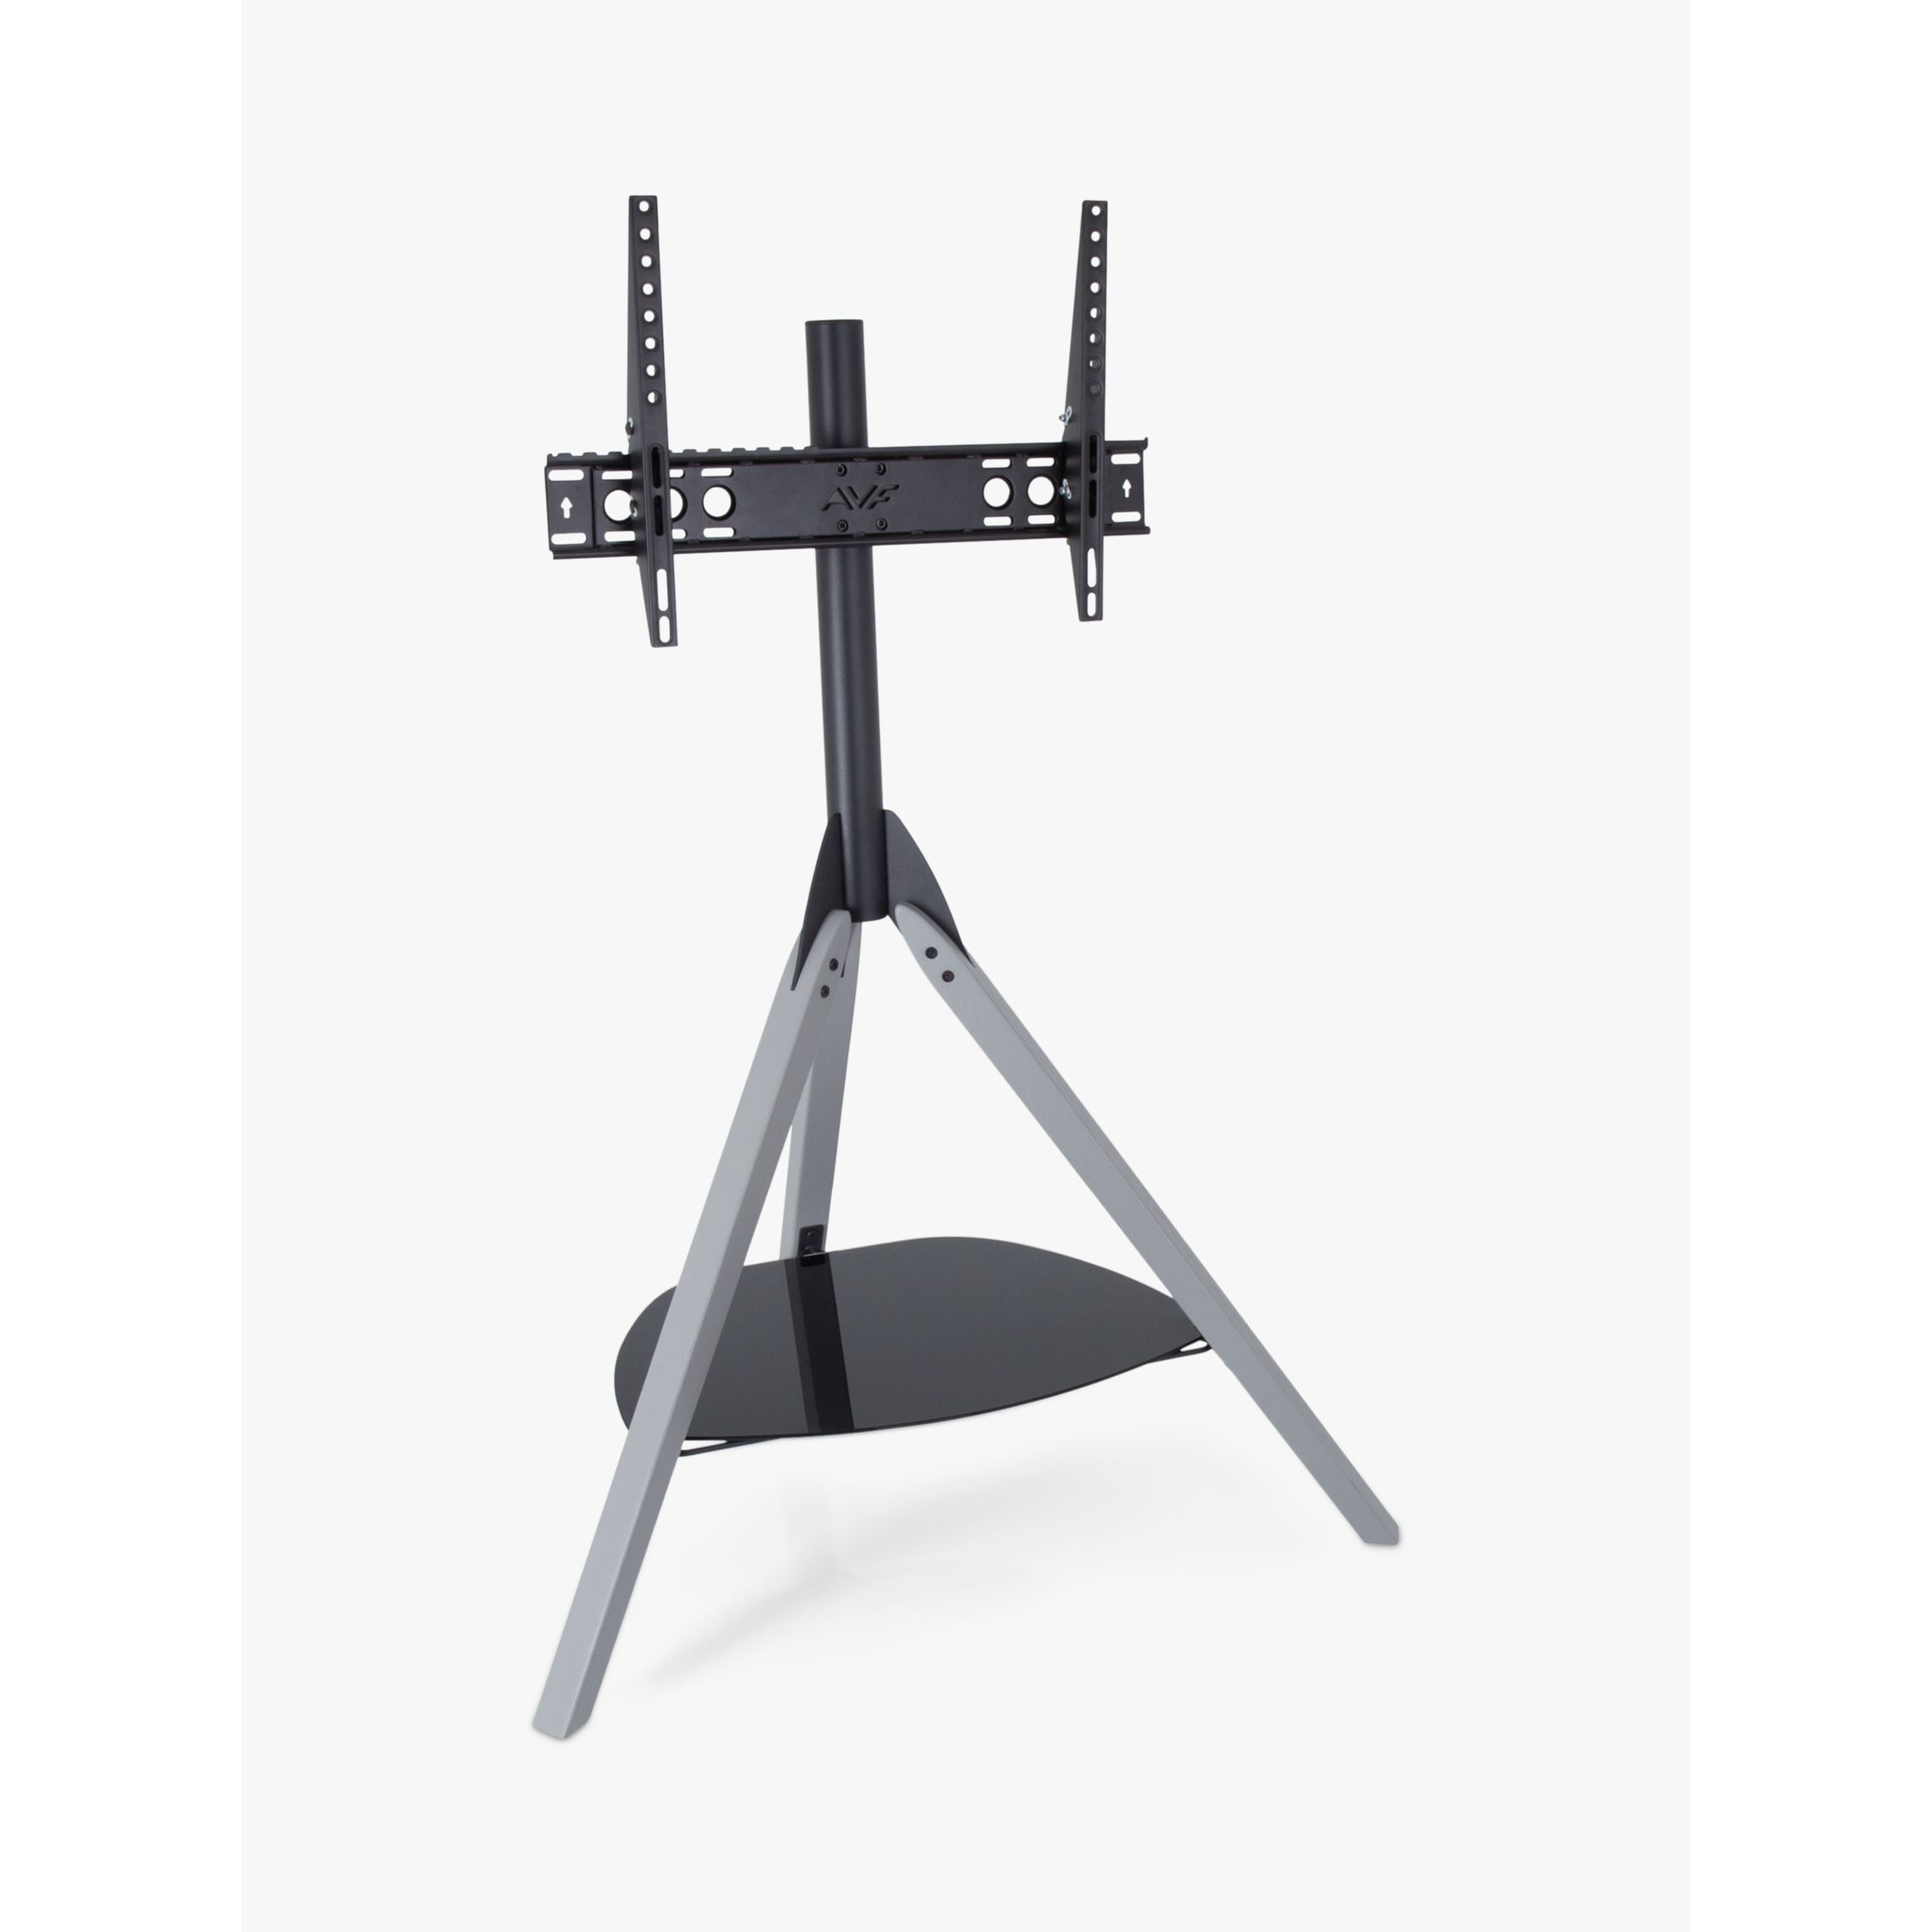 "AVF Hoxton Tripod TV Stand with Mount for TVs from 32"" to 70""" - image 1